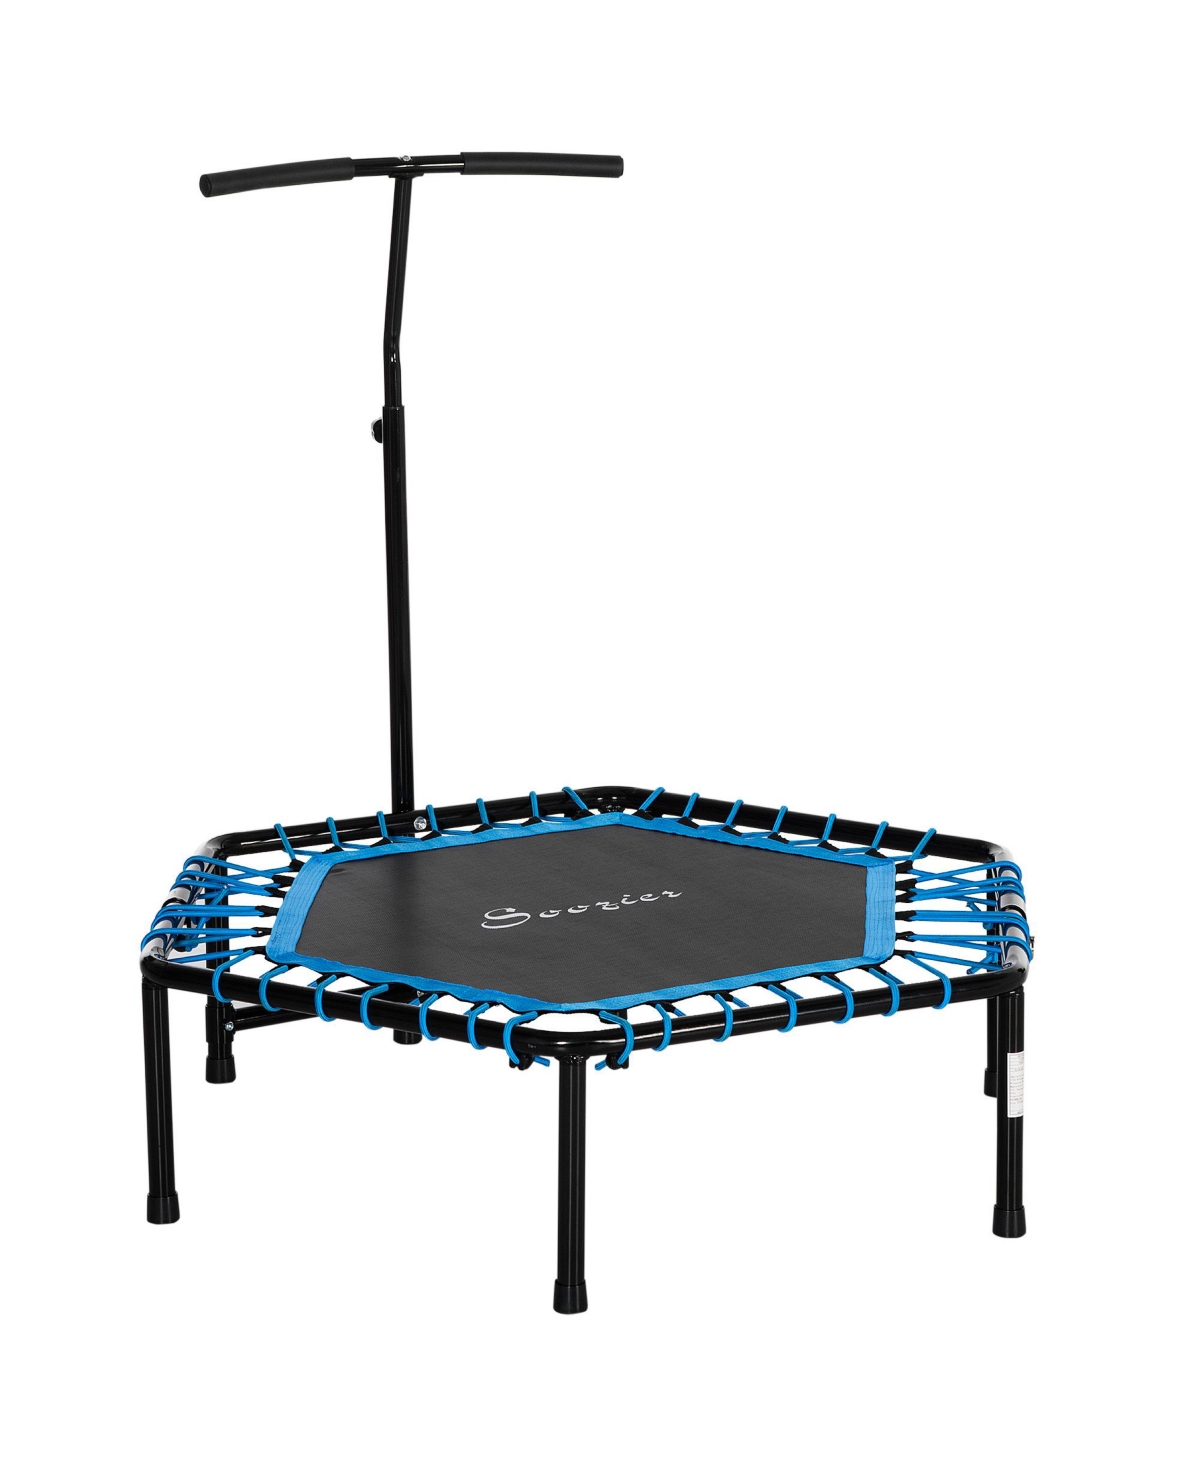 48" Foldable Adjustable Trampoline Bungee Exercise Fitness Trainer - Blue